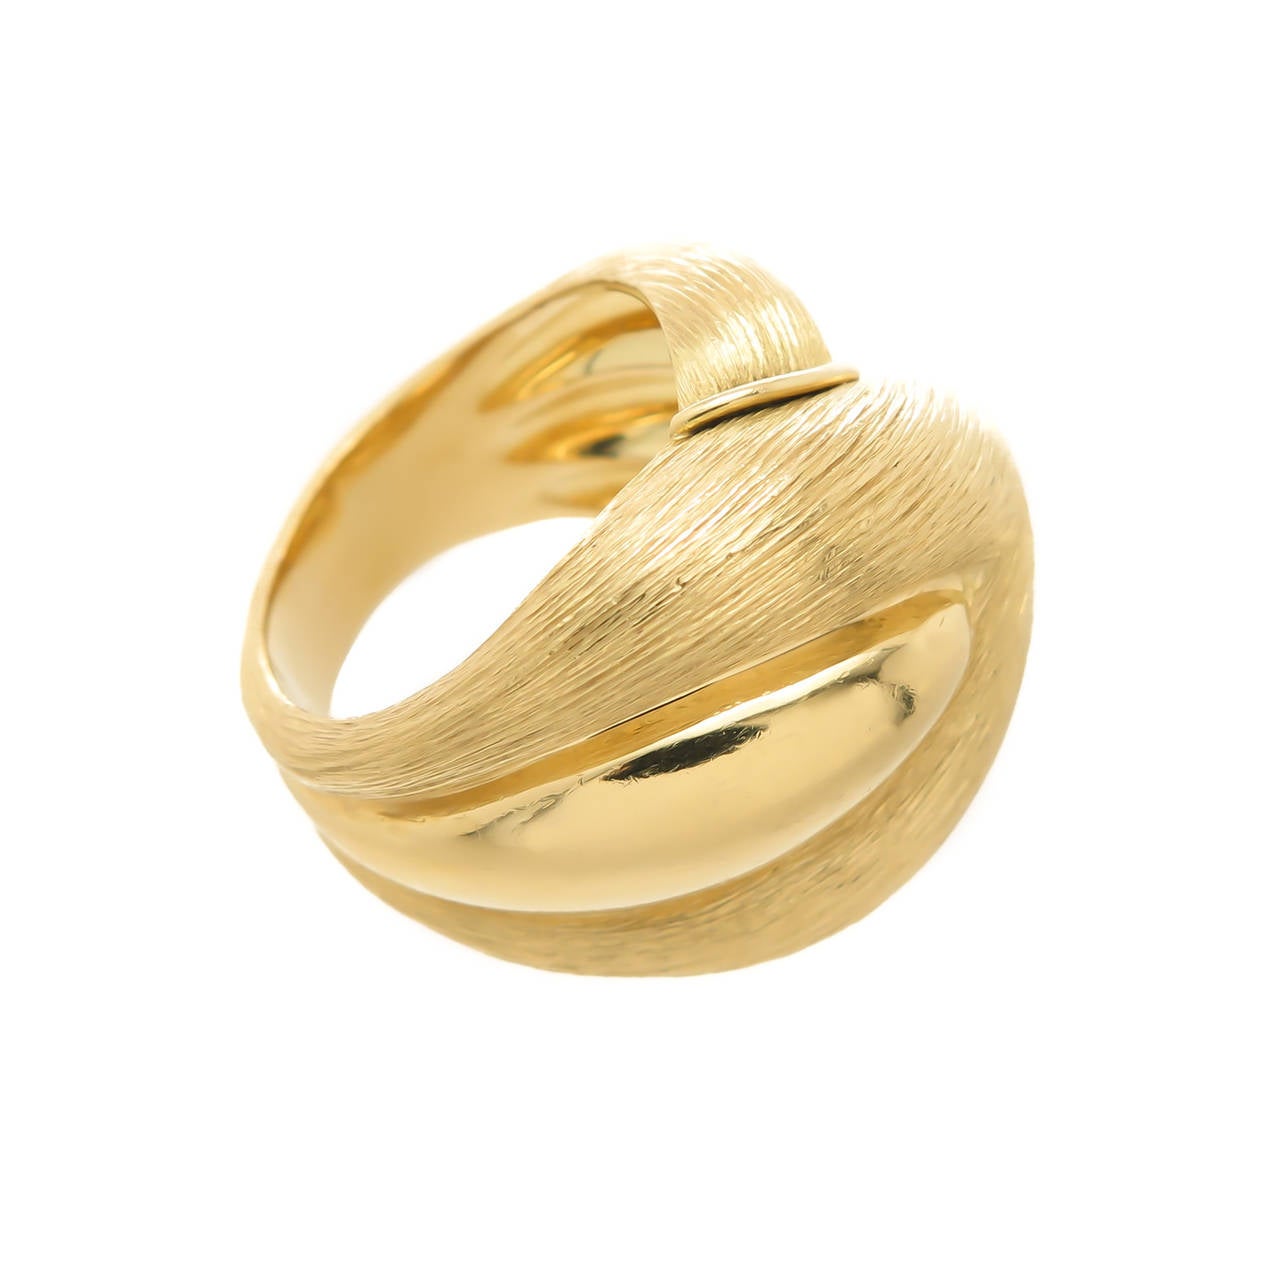 Henry Dunay 18K Yellow Gold Ring with Sabe Brushed finish.In an overlapping Design, measuring 3/4 X 1 inch across the top. Finger size = 6